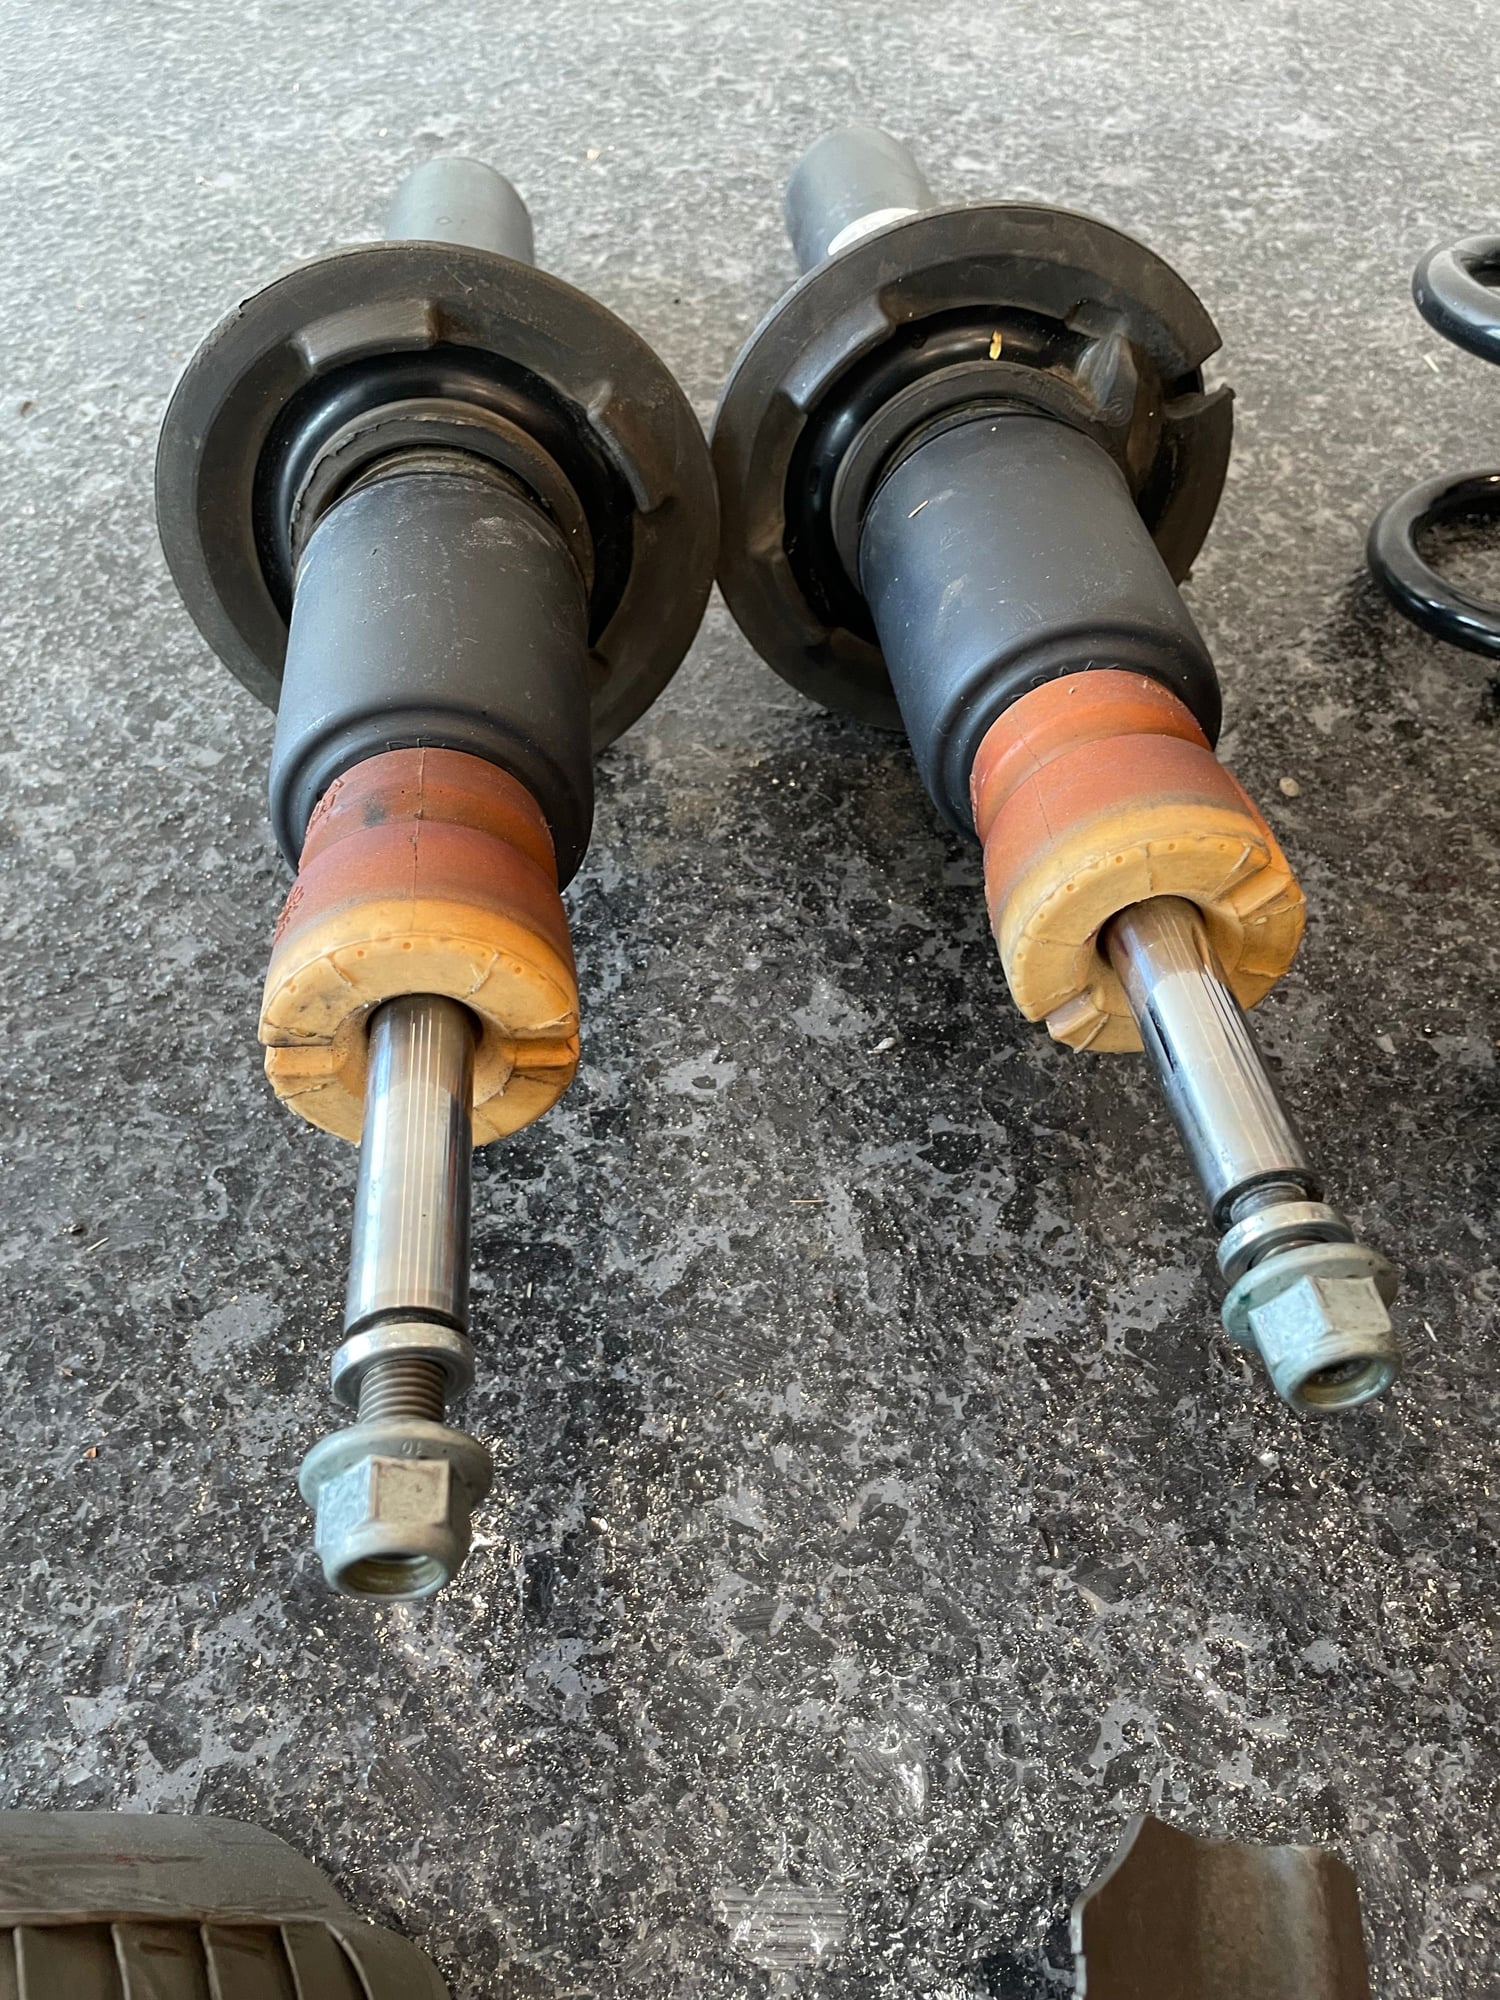 Steering/Suspension - 2017 Porsche Macan - Complete Base suspension (struts, springs, bumpers) - FREE SHIP! - Used - 2015 to 2019 Porsche Macan - St. Louis, MO 63122, United States